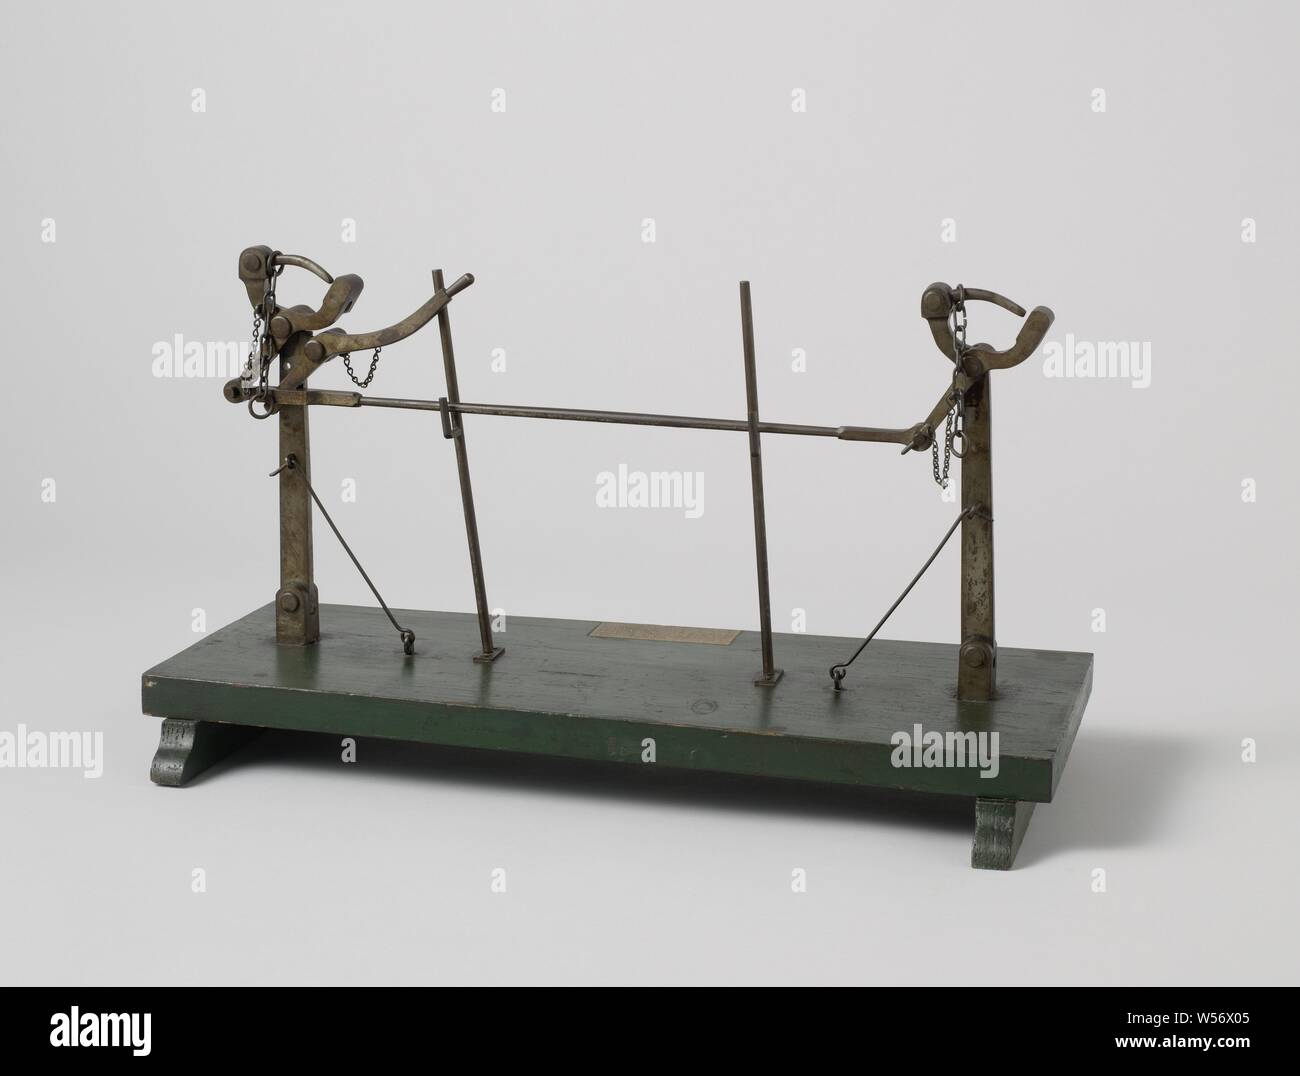 Model of a Lifeboat Release, Model of a sloop trap, on a groundboard. Two hooks are used to release the hooks of the davits, so that they open under the weight of the sloop., J.P.H. von Schmidt auf Altenstadt (mentioned on object), Netherlands (possibly), 1879, wood (plant material), iron (metal), h 33 cm × w 50 cm × d 24.5 cm Stock Photo